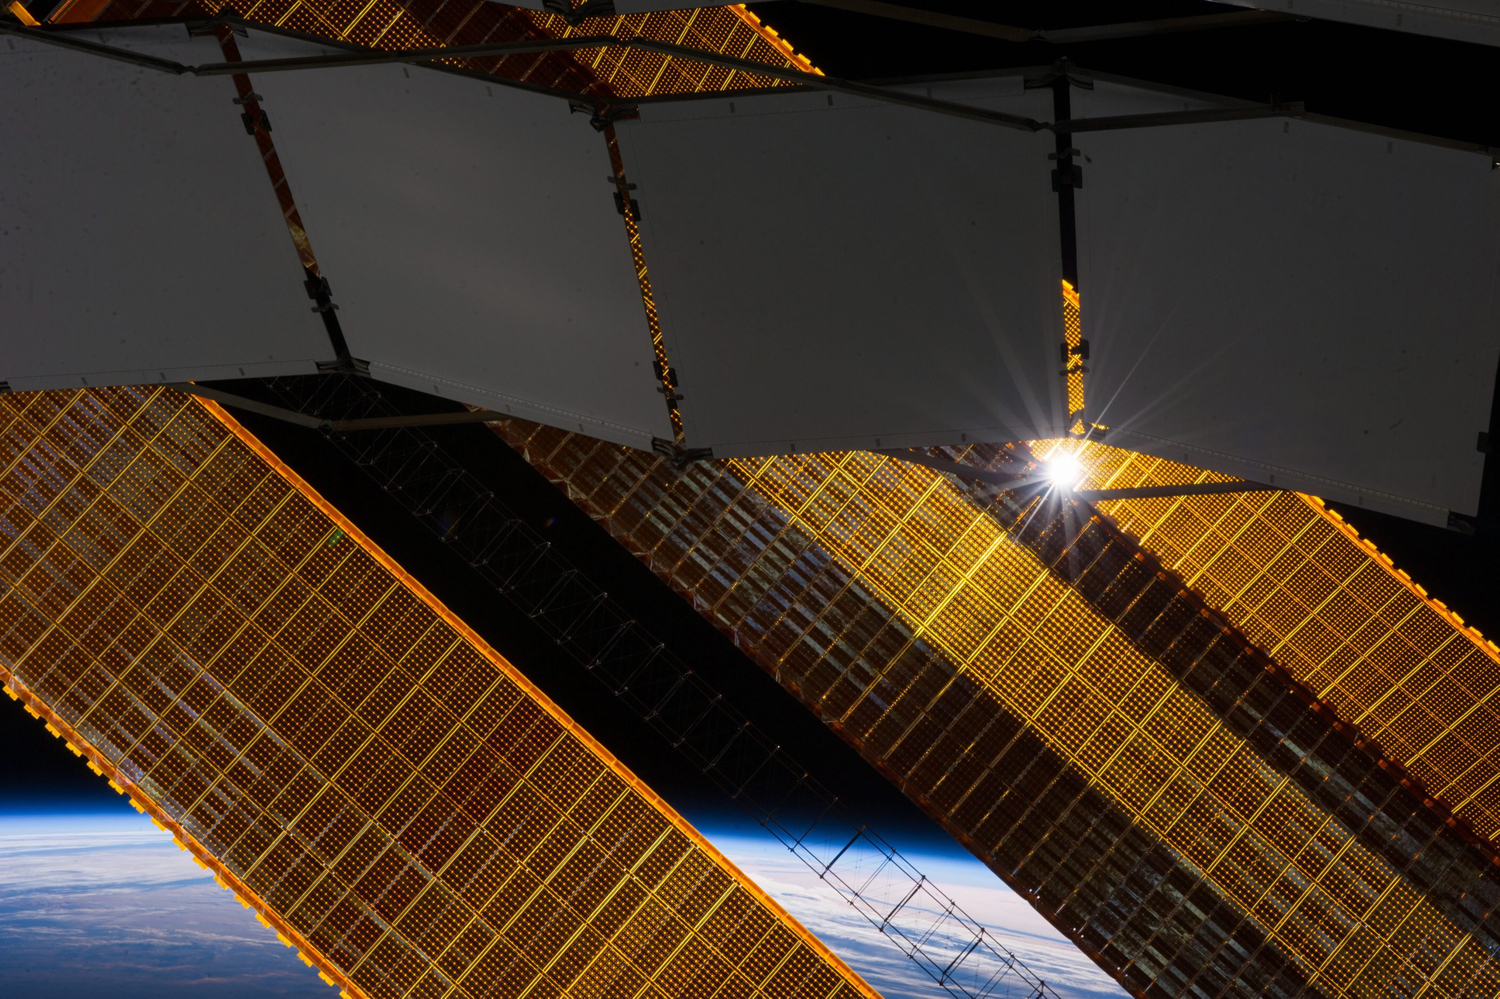 The sun shines through a radiator and a solar array panel on the International Space Station (ISS) in this photograph taken by a crew member on Jan. 2, 2014.